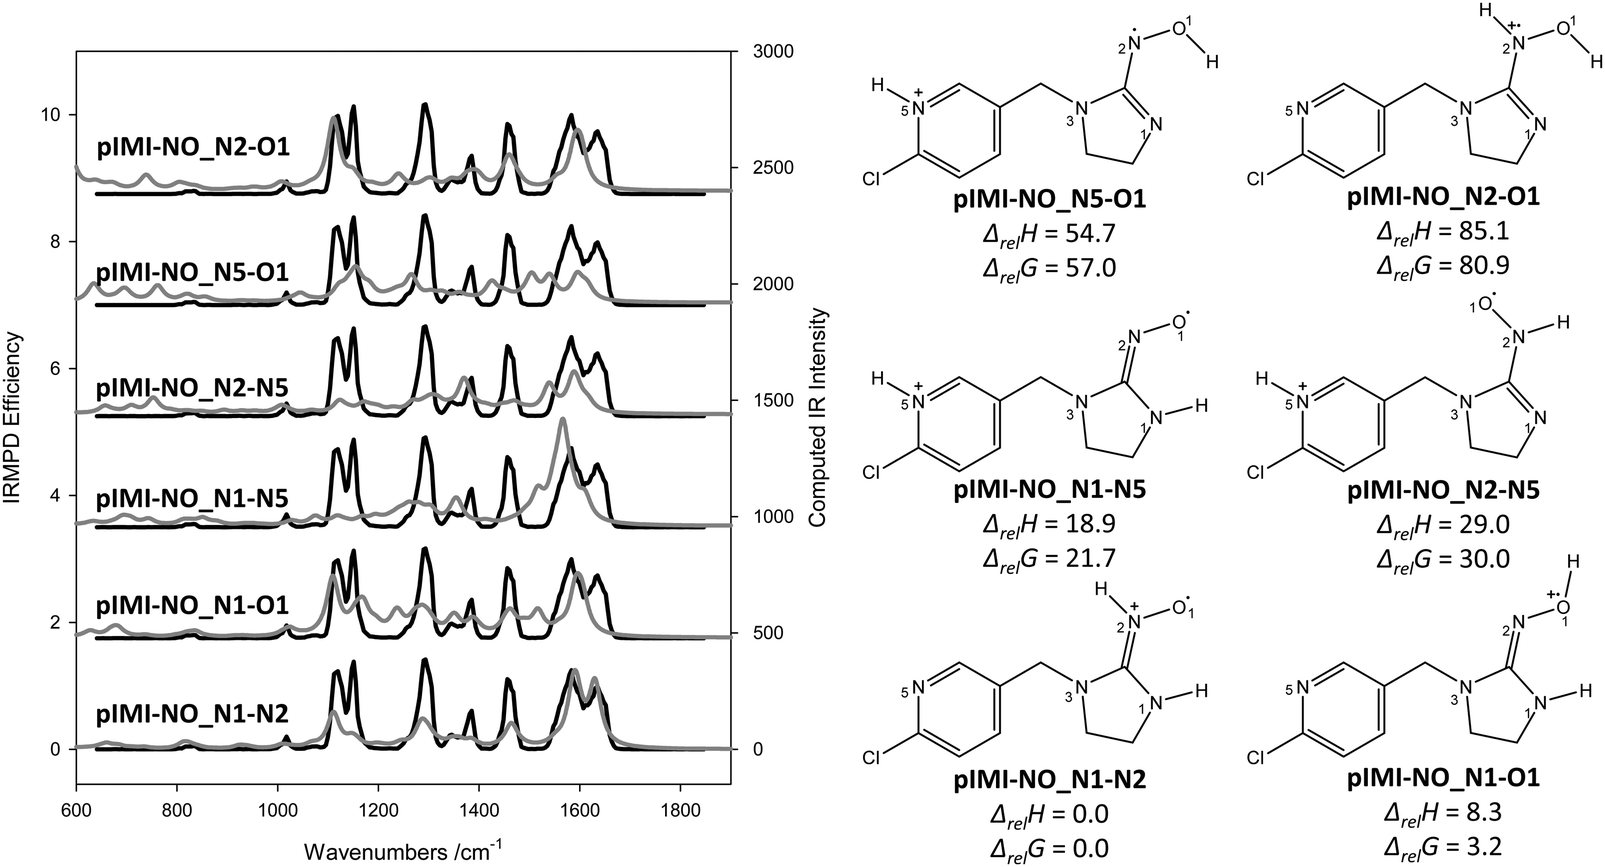 A vibrational spectroscopic and computational study of the structures of  protonated imidacloprid and its fragmentation products in the gas phase -  Physical Chemistry Chemical Physics (RSC Publishing) DOI:10.1039/D0CP06069K